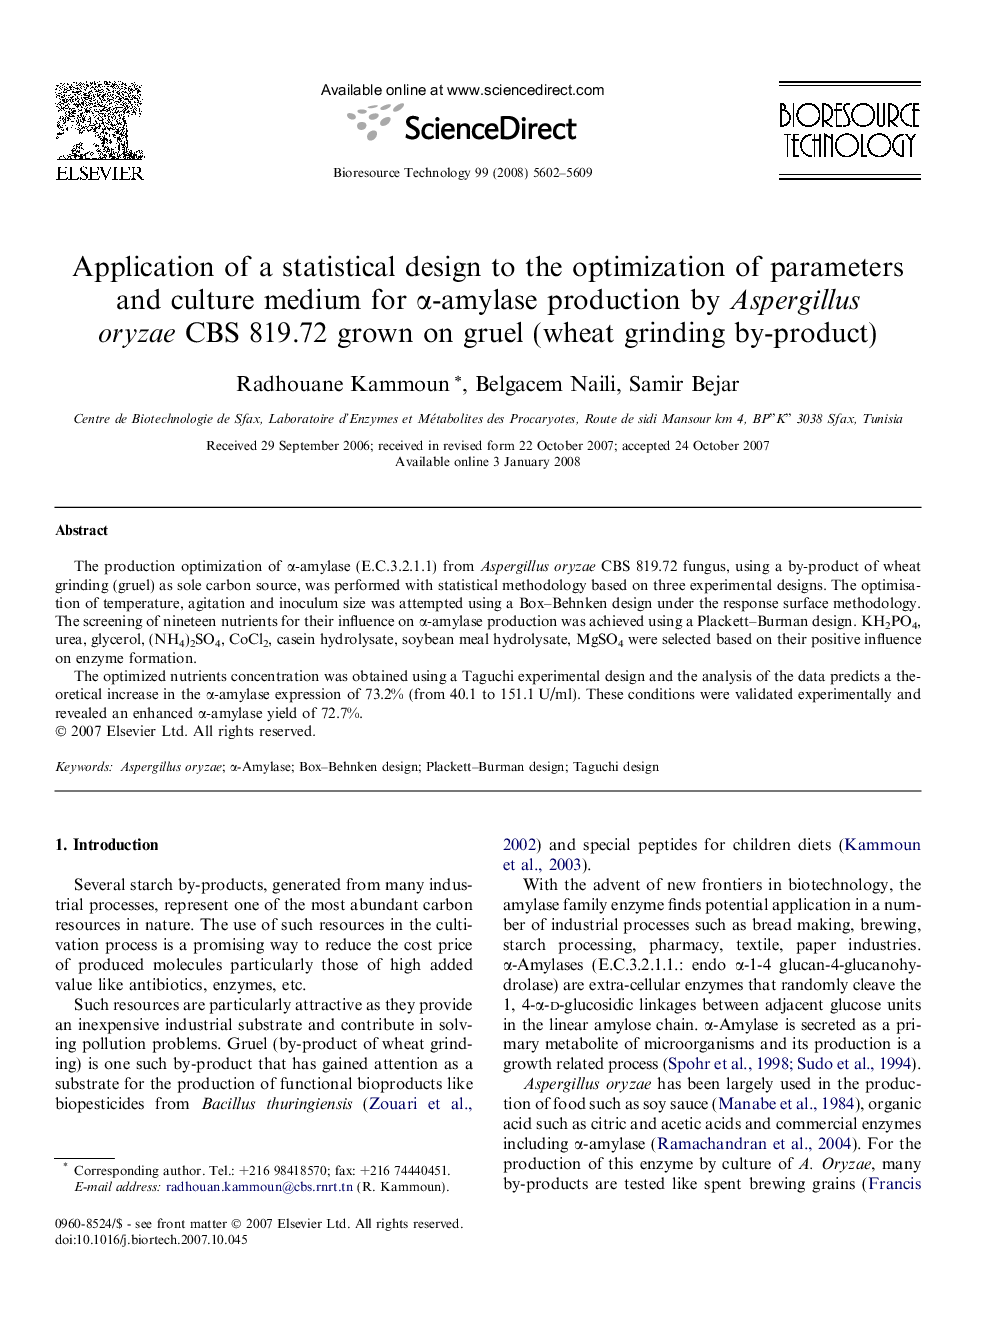 Application of a statistical design to the optimization of parameters and culture medium for α-amylase production by Aspergillus oryzae CBS 819.72 grown on gruel (wheat grinding by-product)